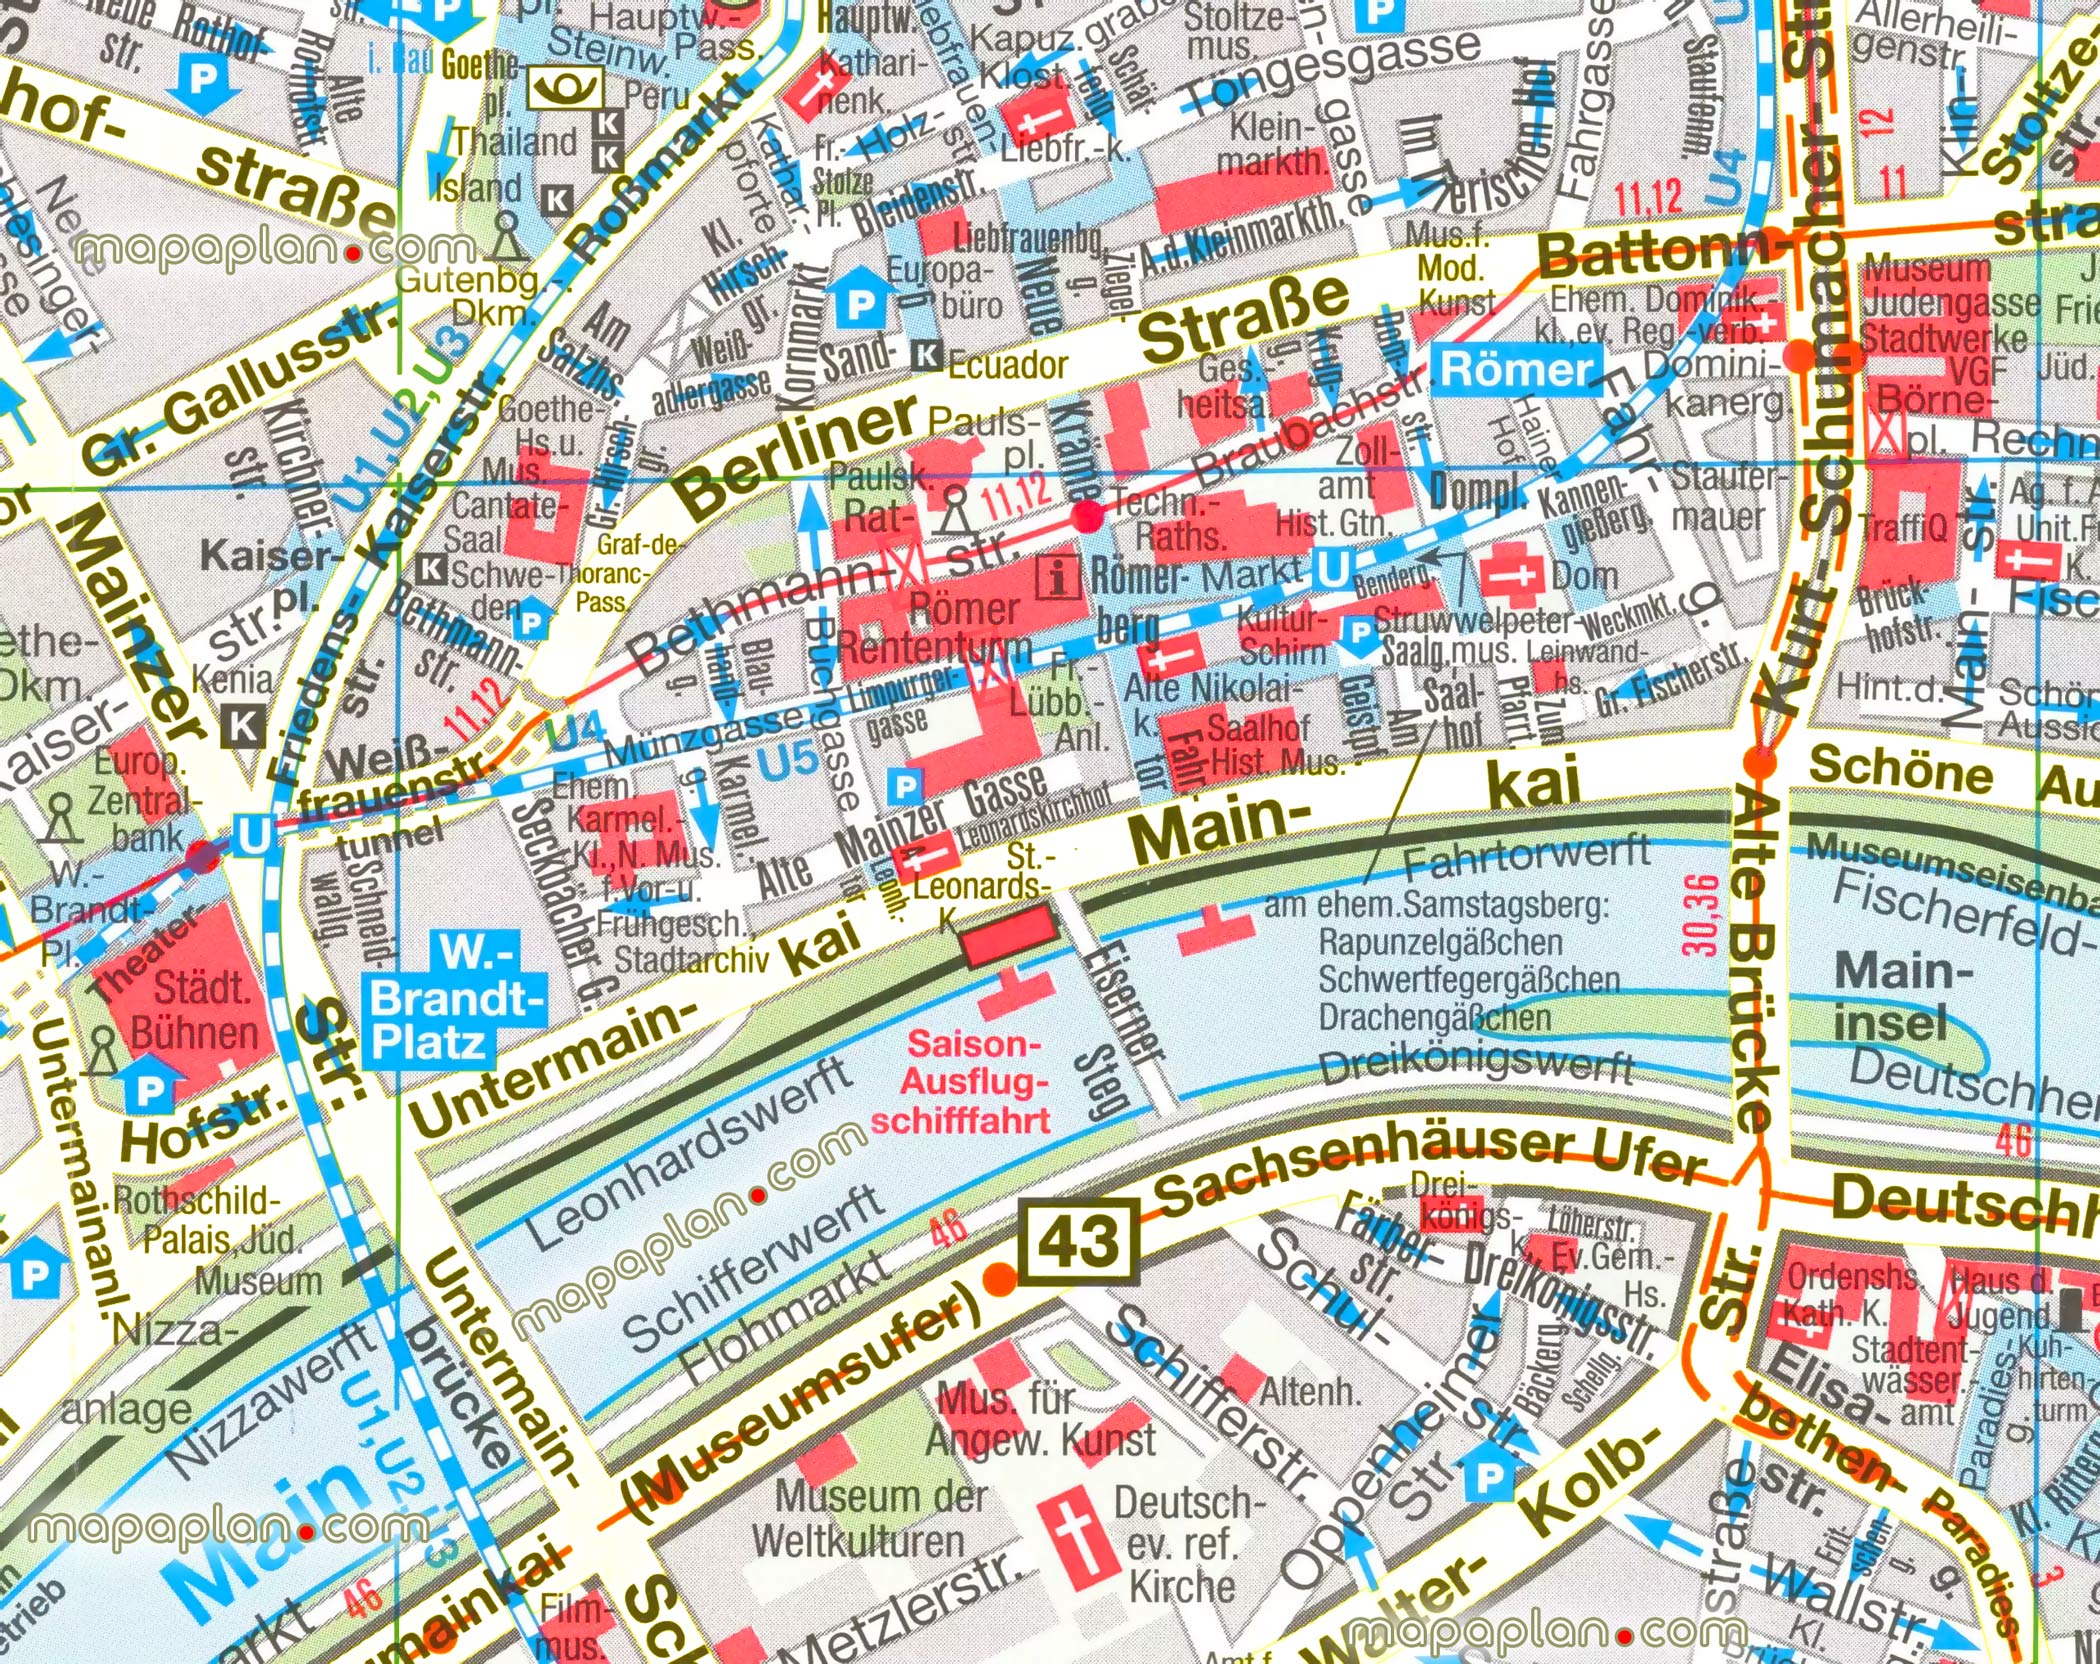 Frankfurt Map City Map Stadtplan Karte Of Frankfurt Germany Showing Road Street Names 1 Day Trip Travel Locations To Visit Must See Tourist Attractions Famous Destinations Must Do Spots Landmark Destinations